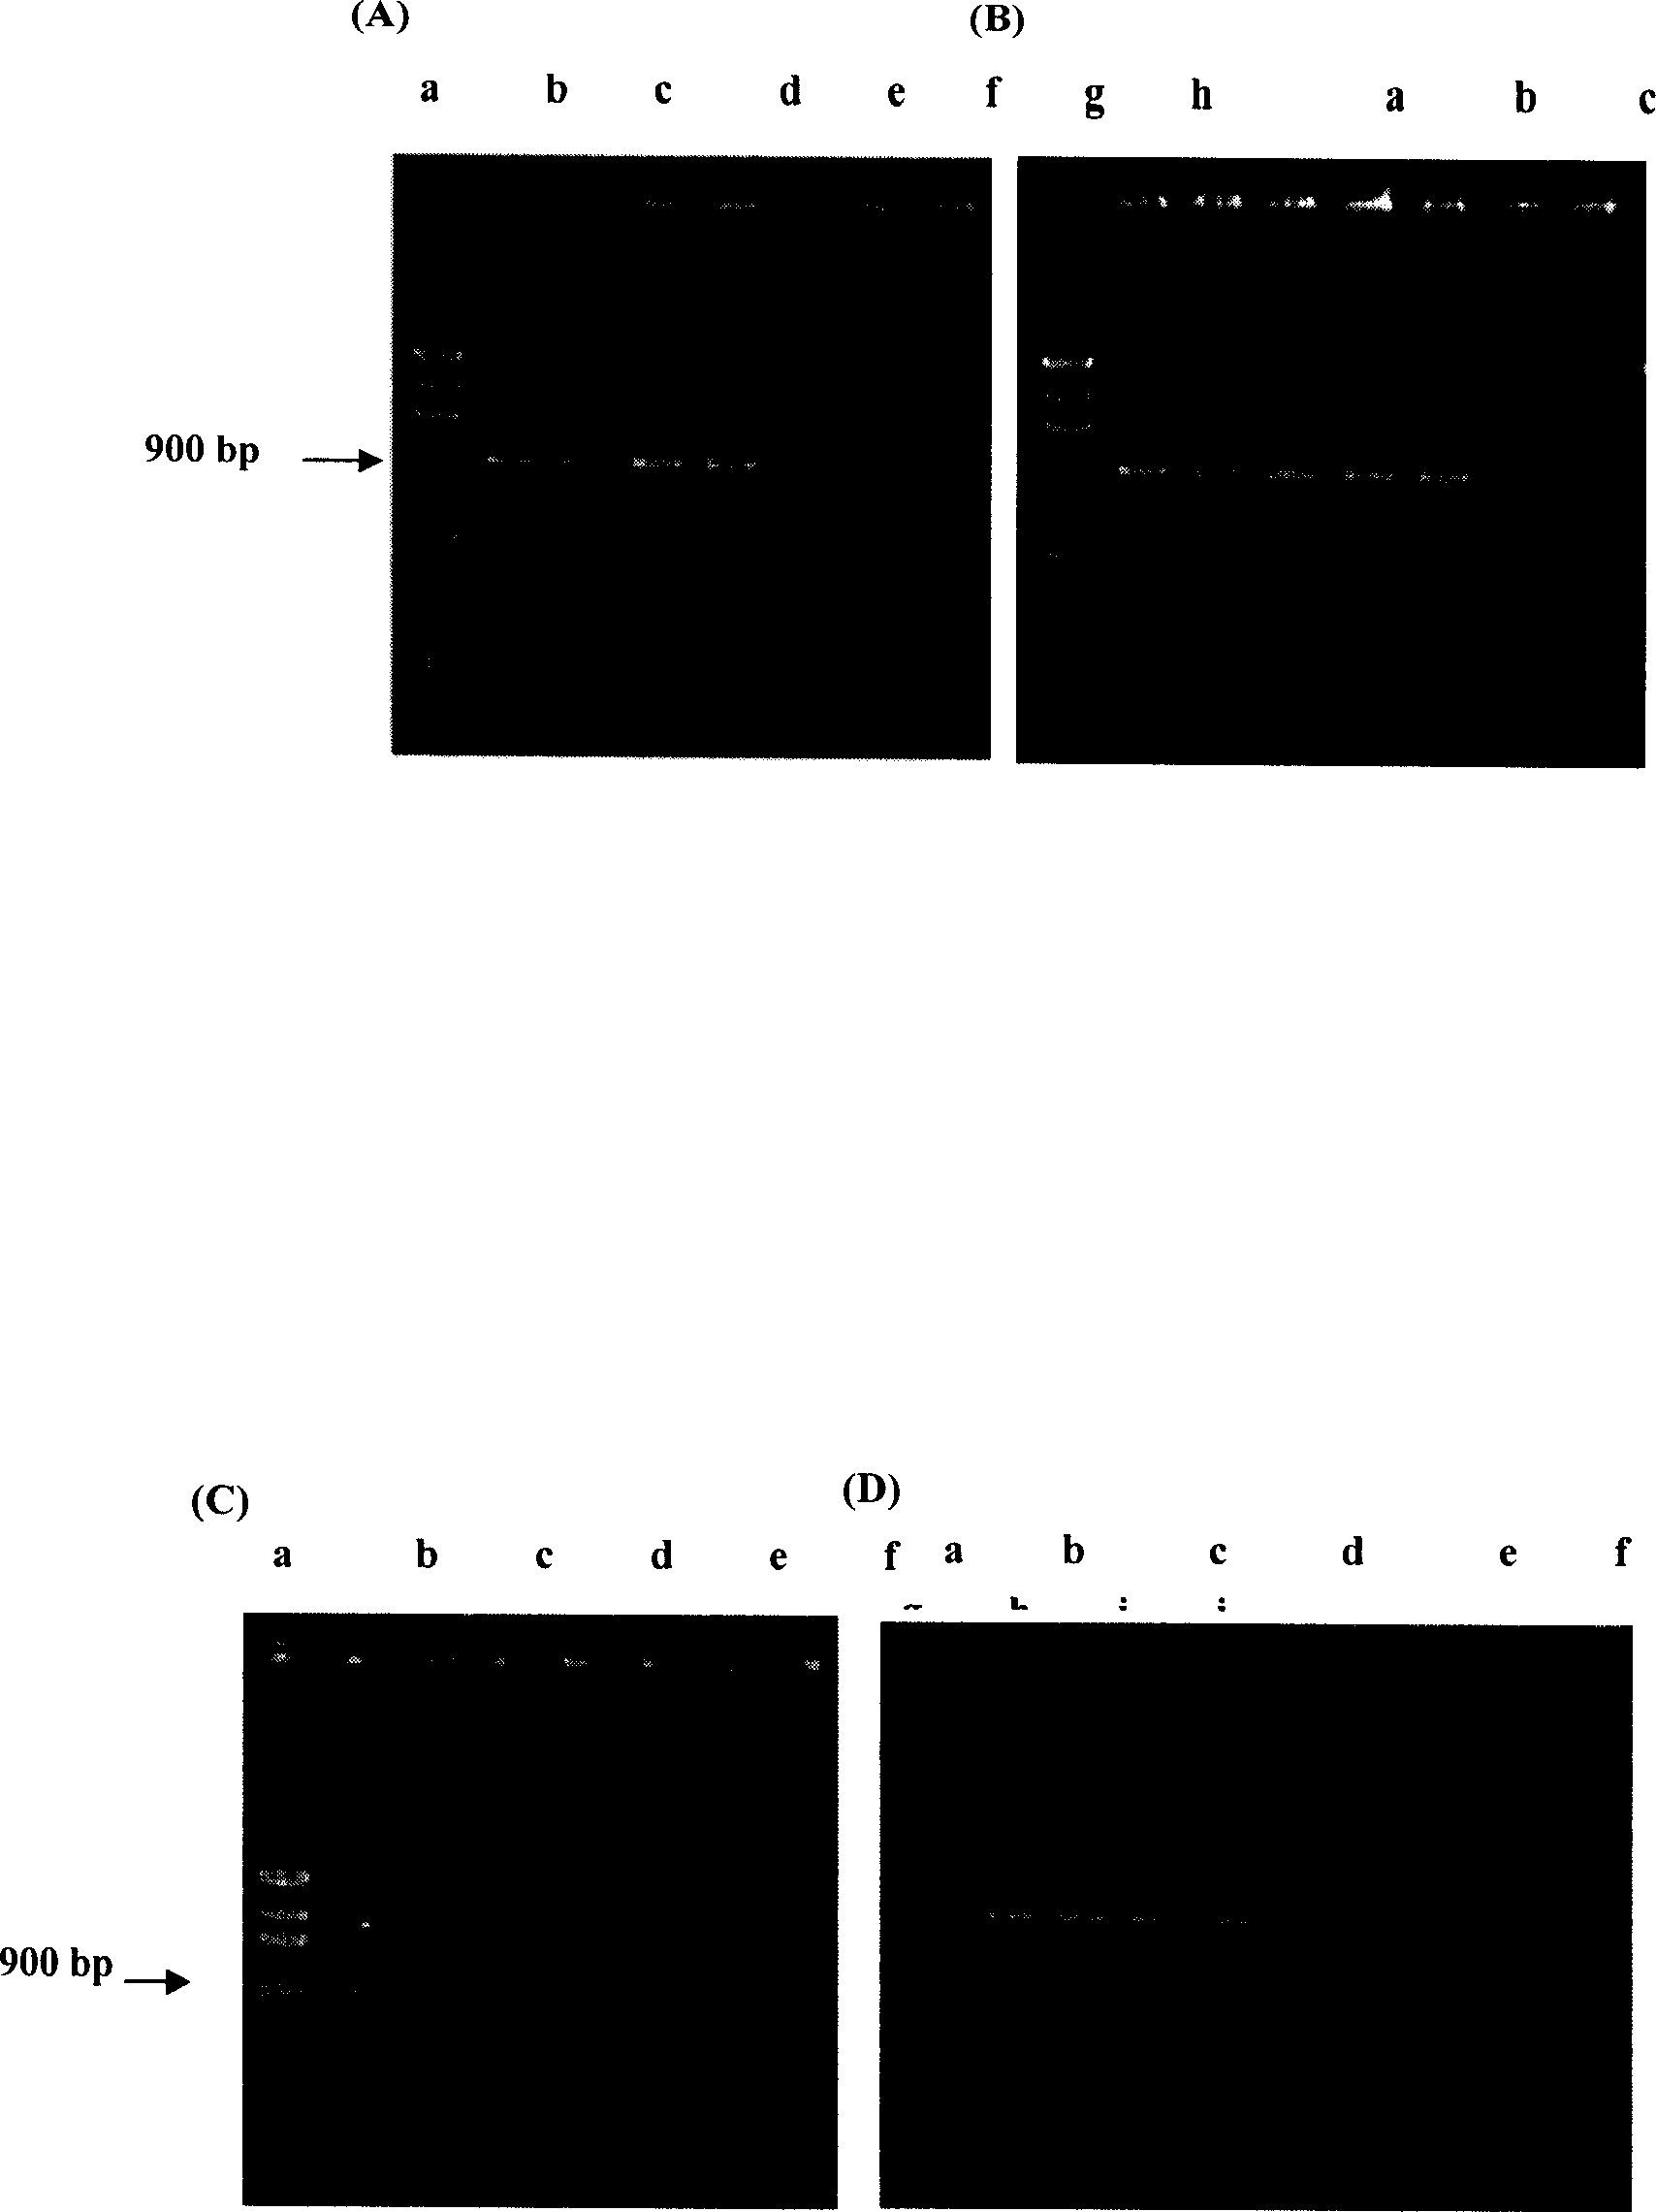 Chain reaction method for detecting polymerase of salmonella choleraesuls